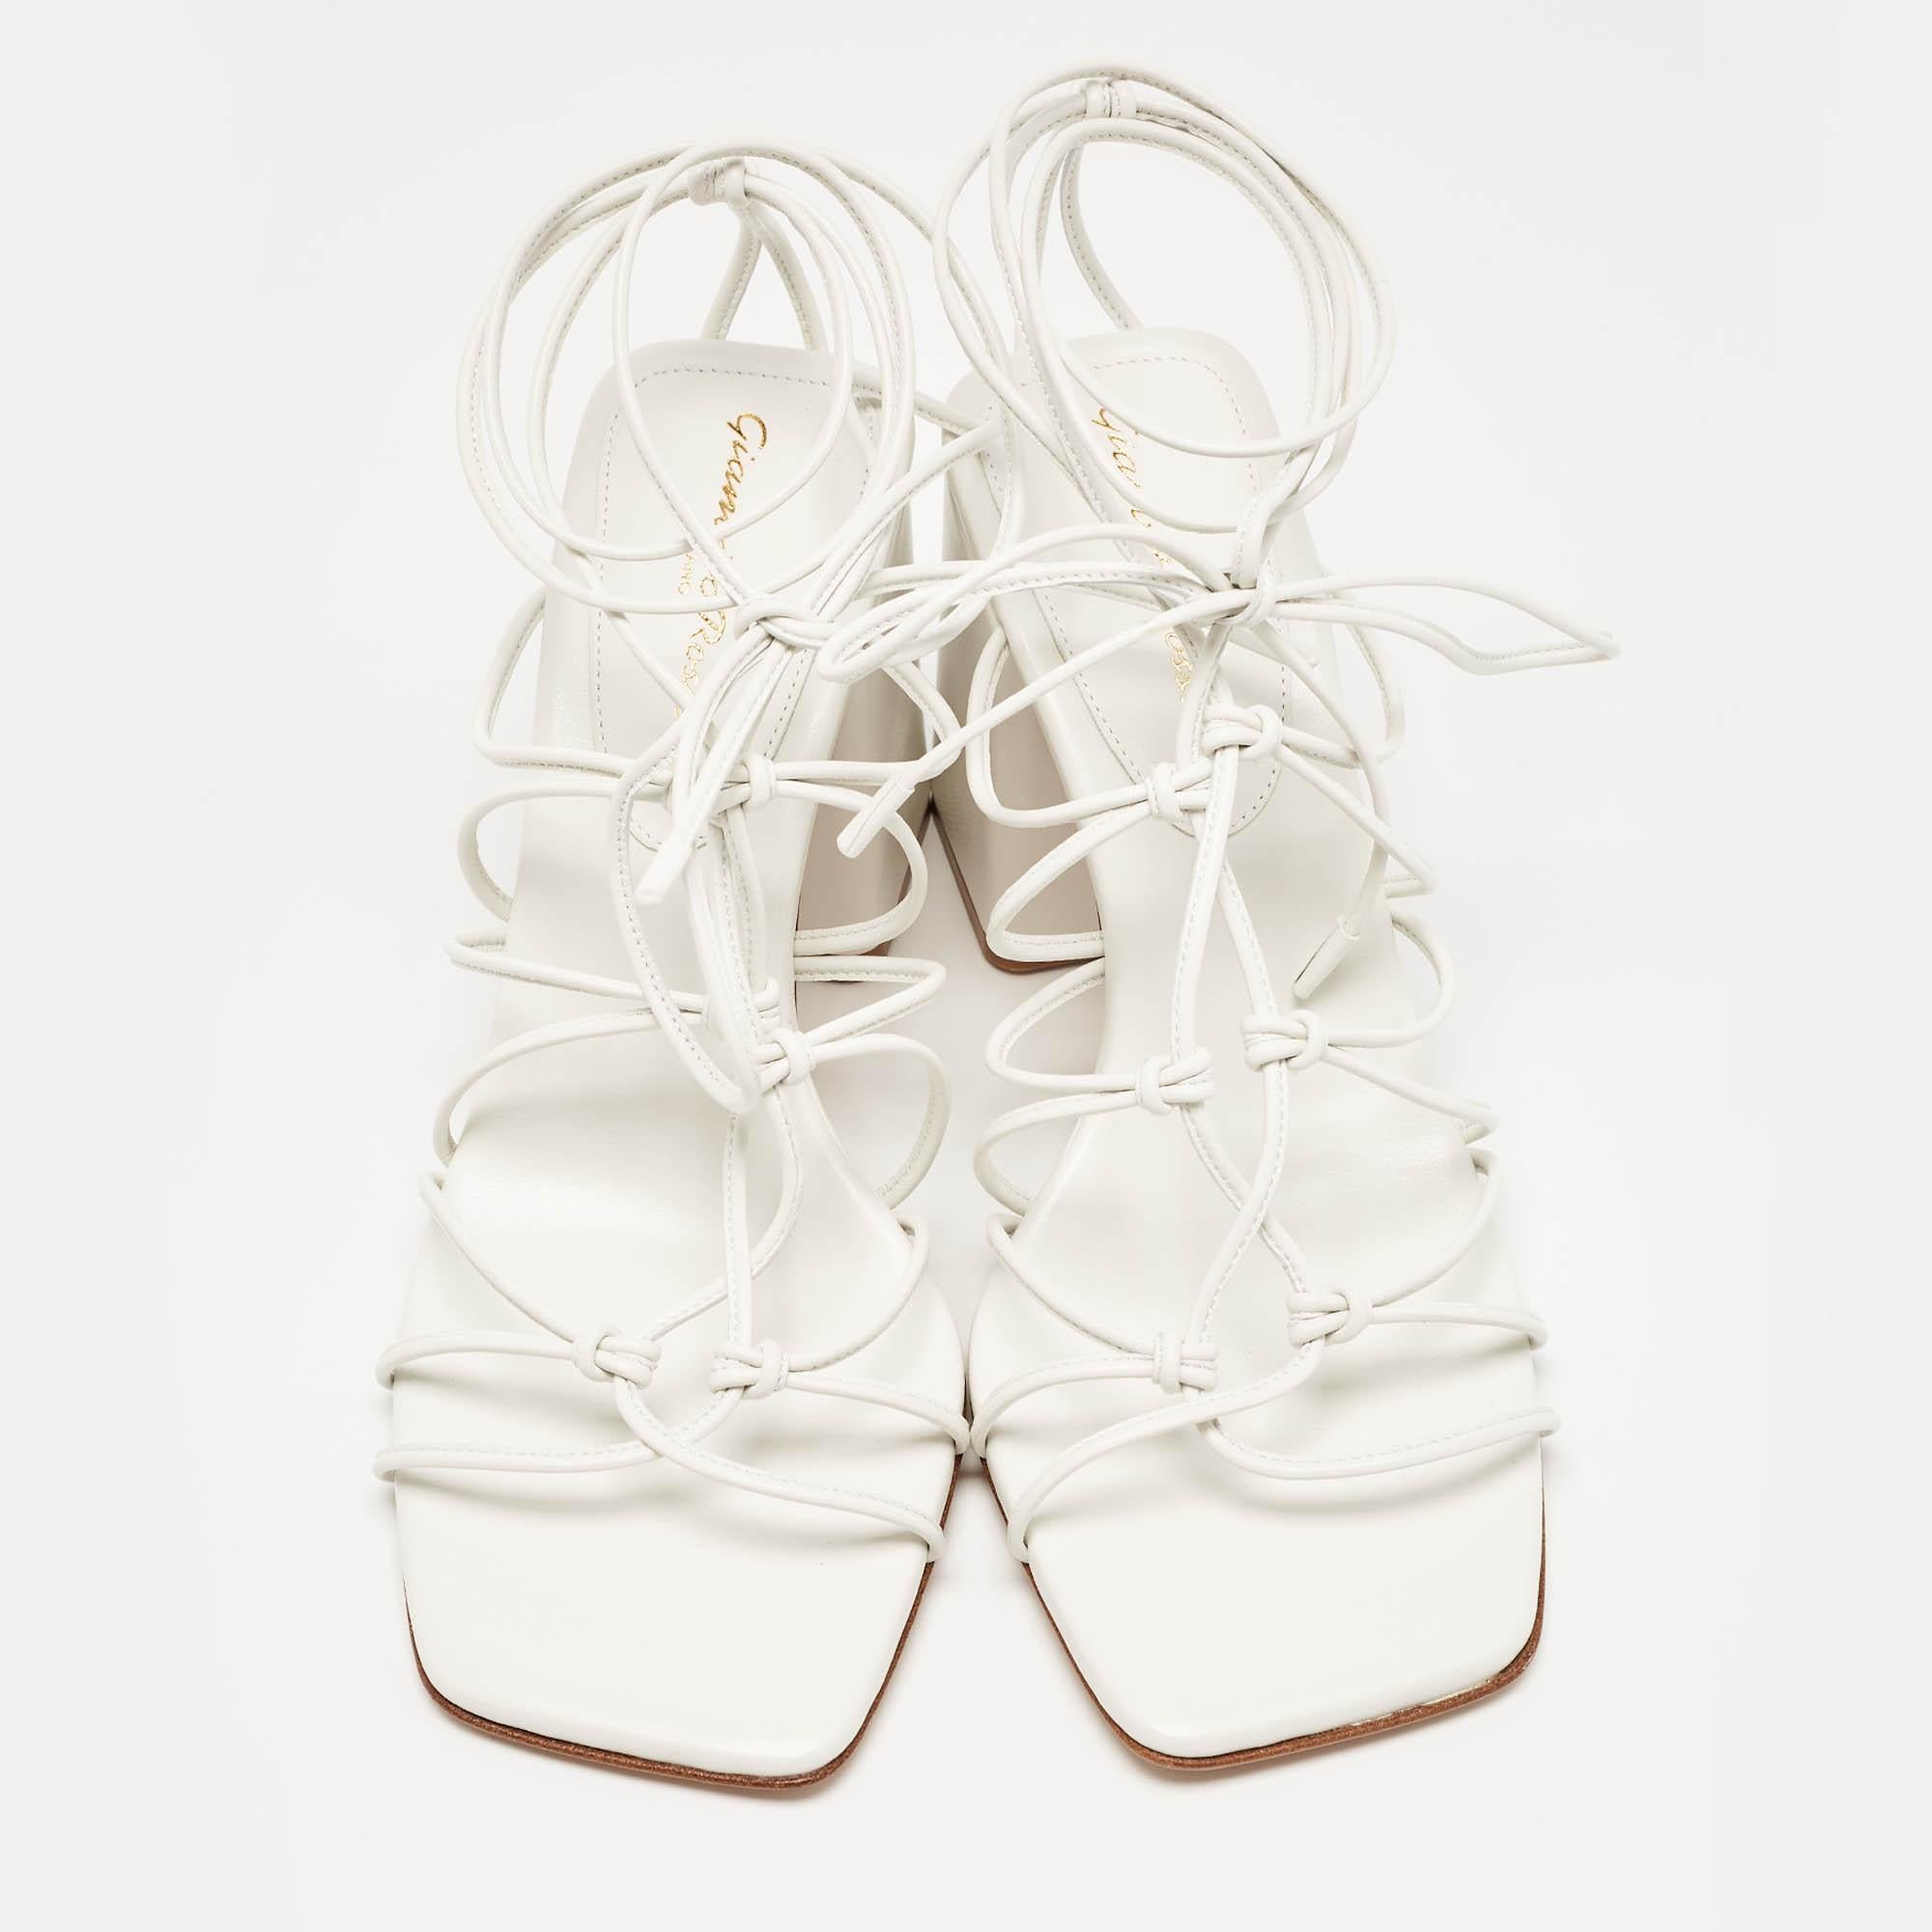 In classy white leather, the Gianvito Rossi Minas sandals exude confident charm. Delicate straps gracefully embrace the foot, while a sturdy heel provides stability and style. With impeccable craftsmanship and timeless design, these sandals